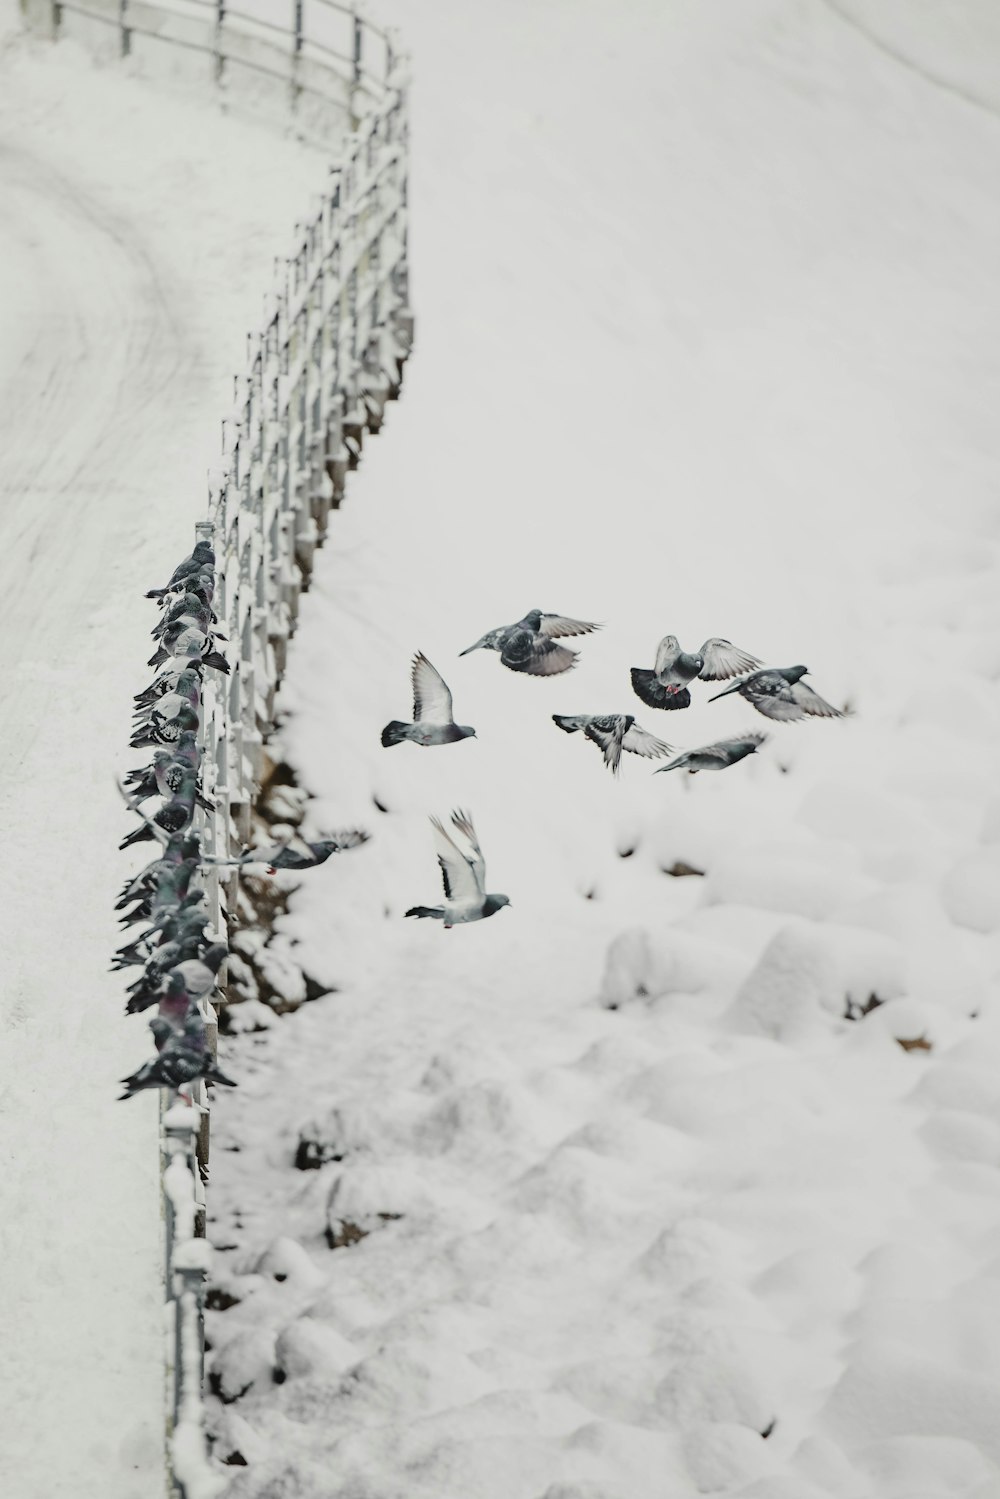 birds on snow covered ground during daytime